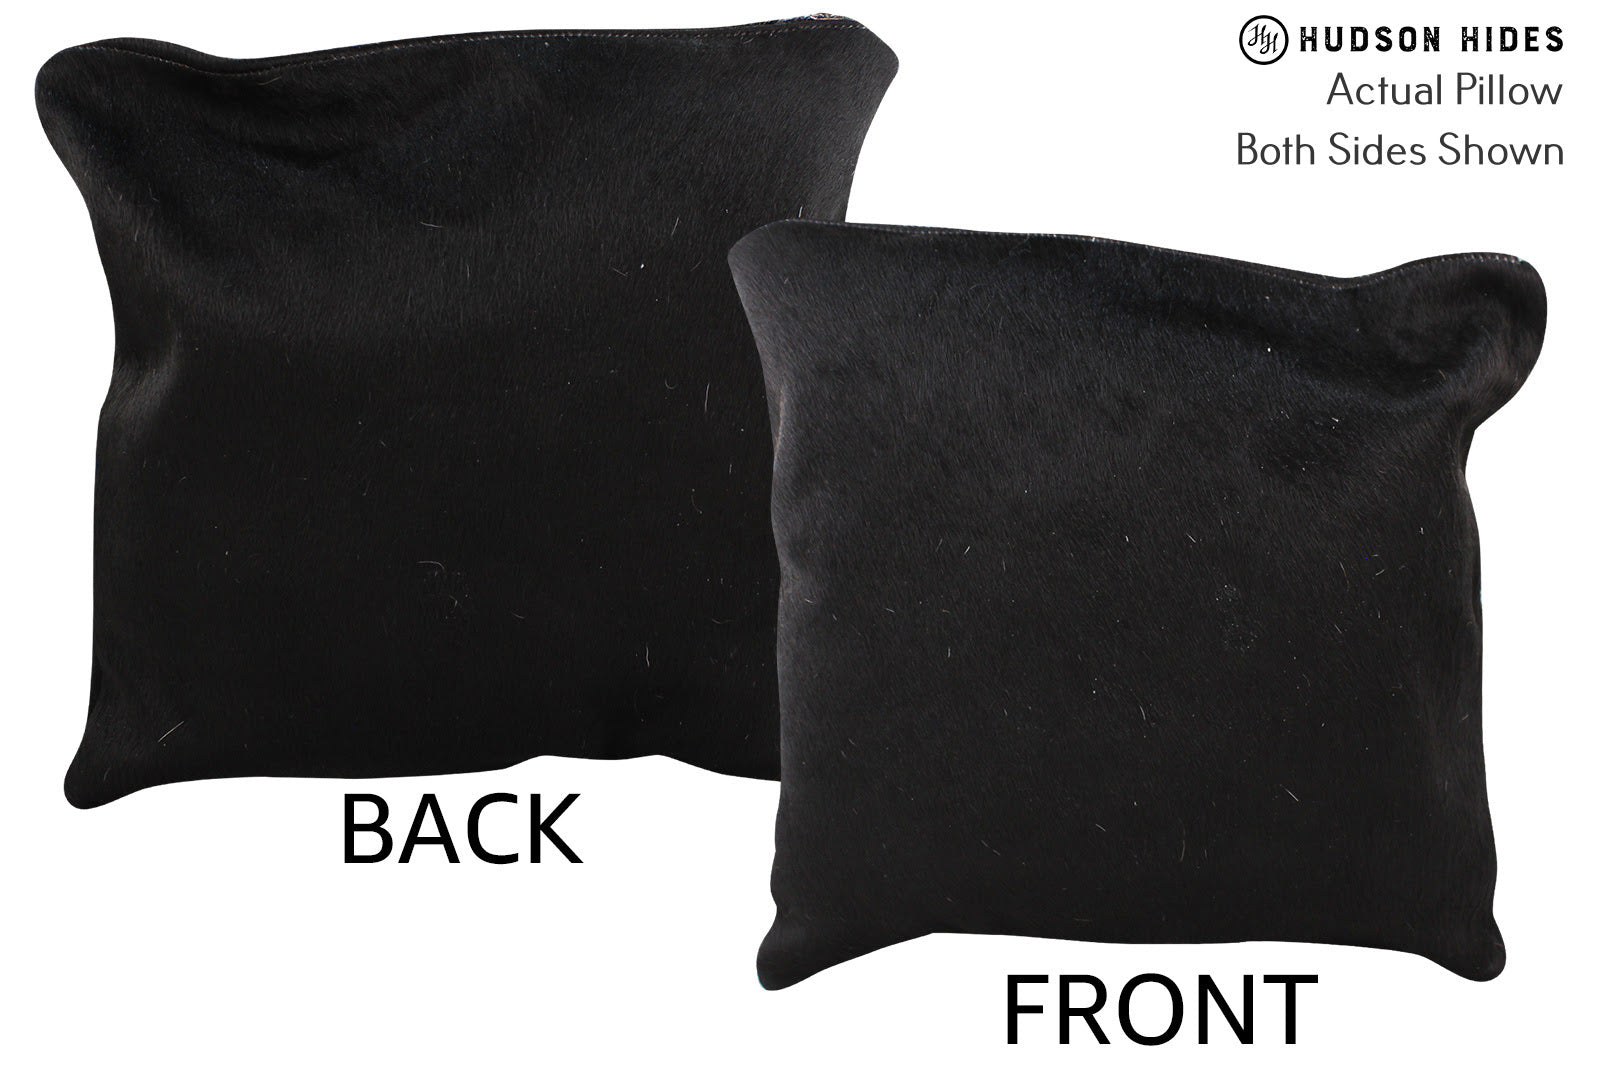 Solid Black Cowhide Pillow #74756